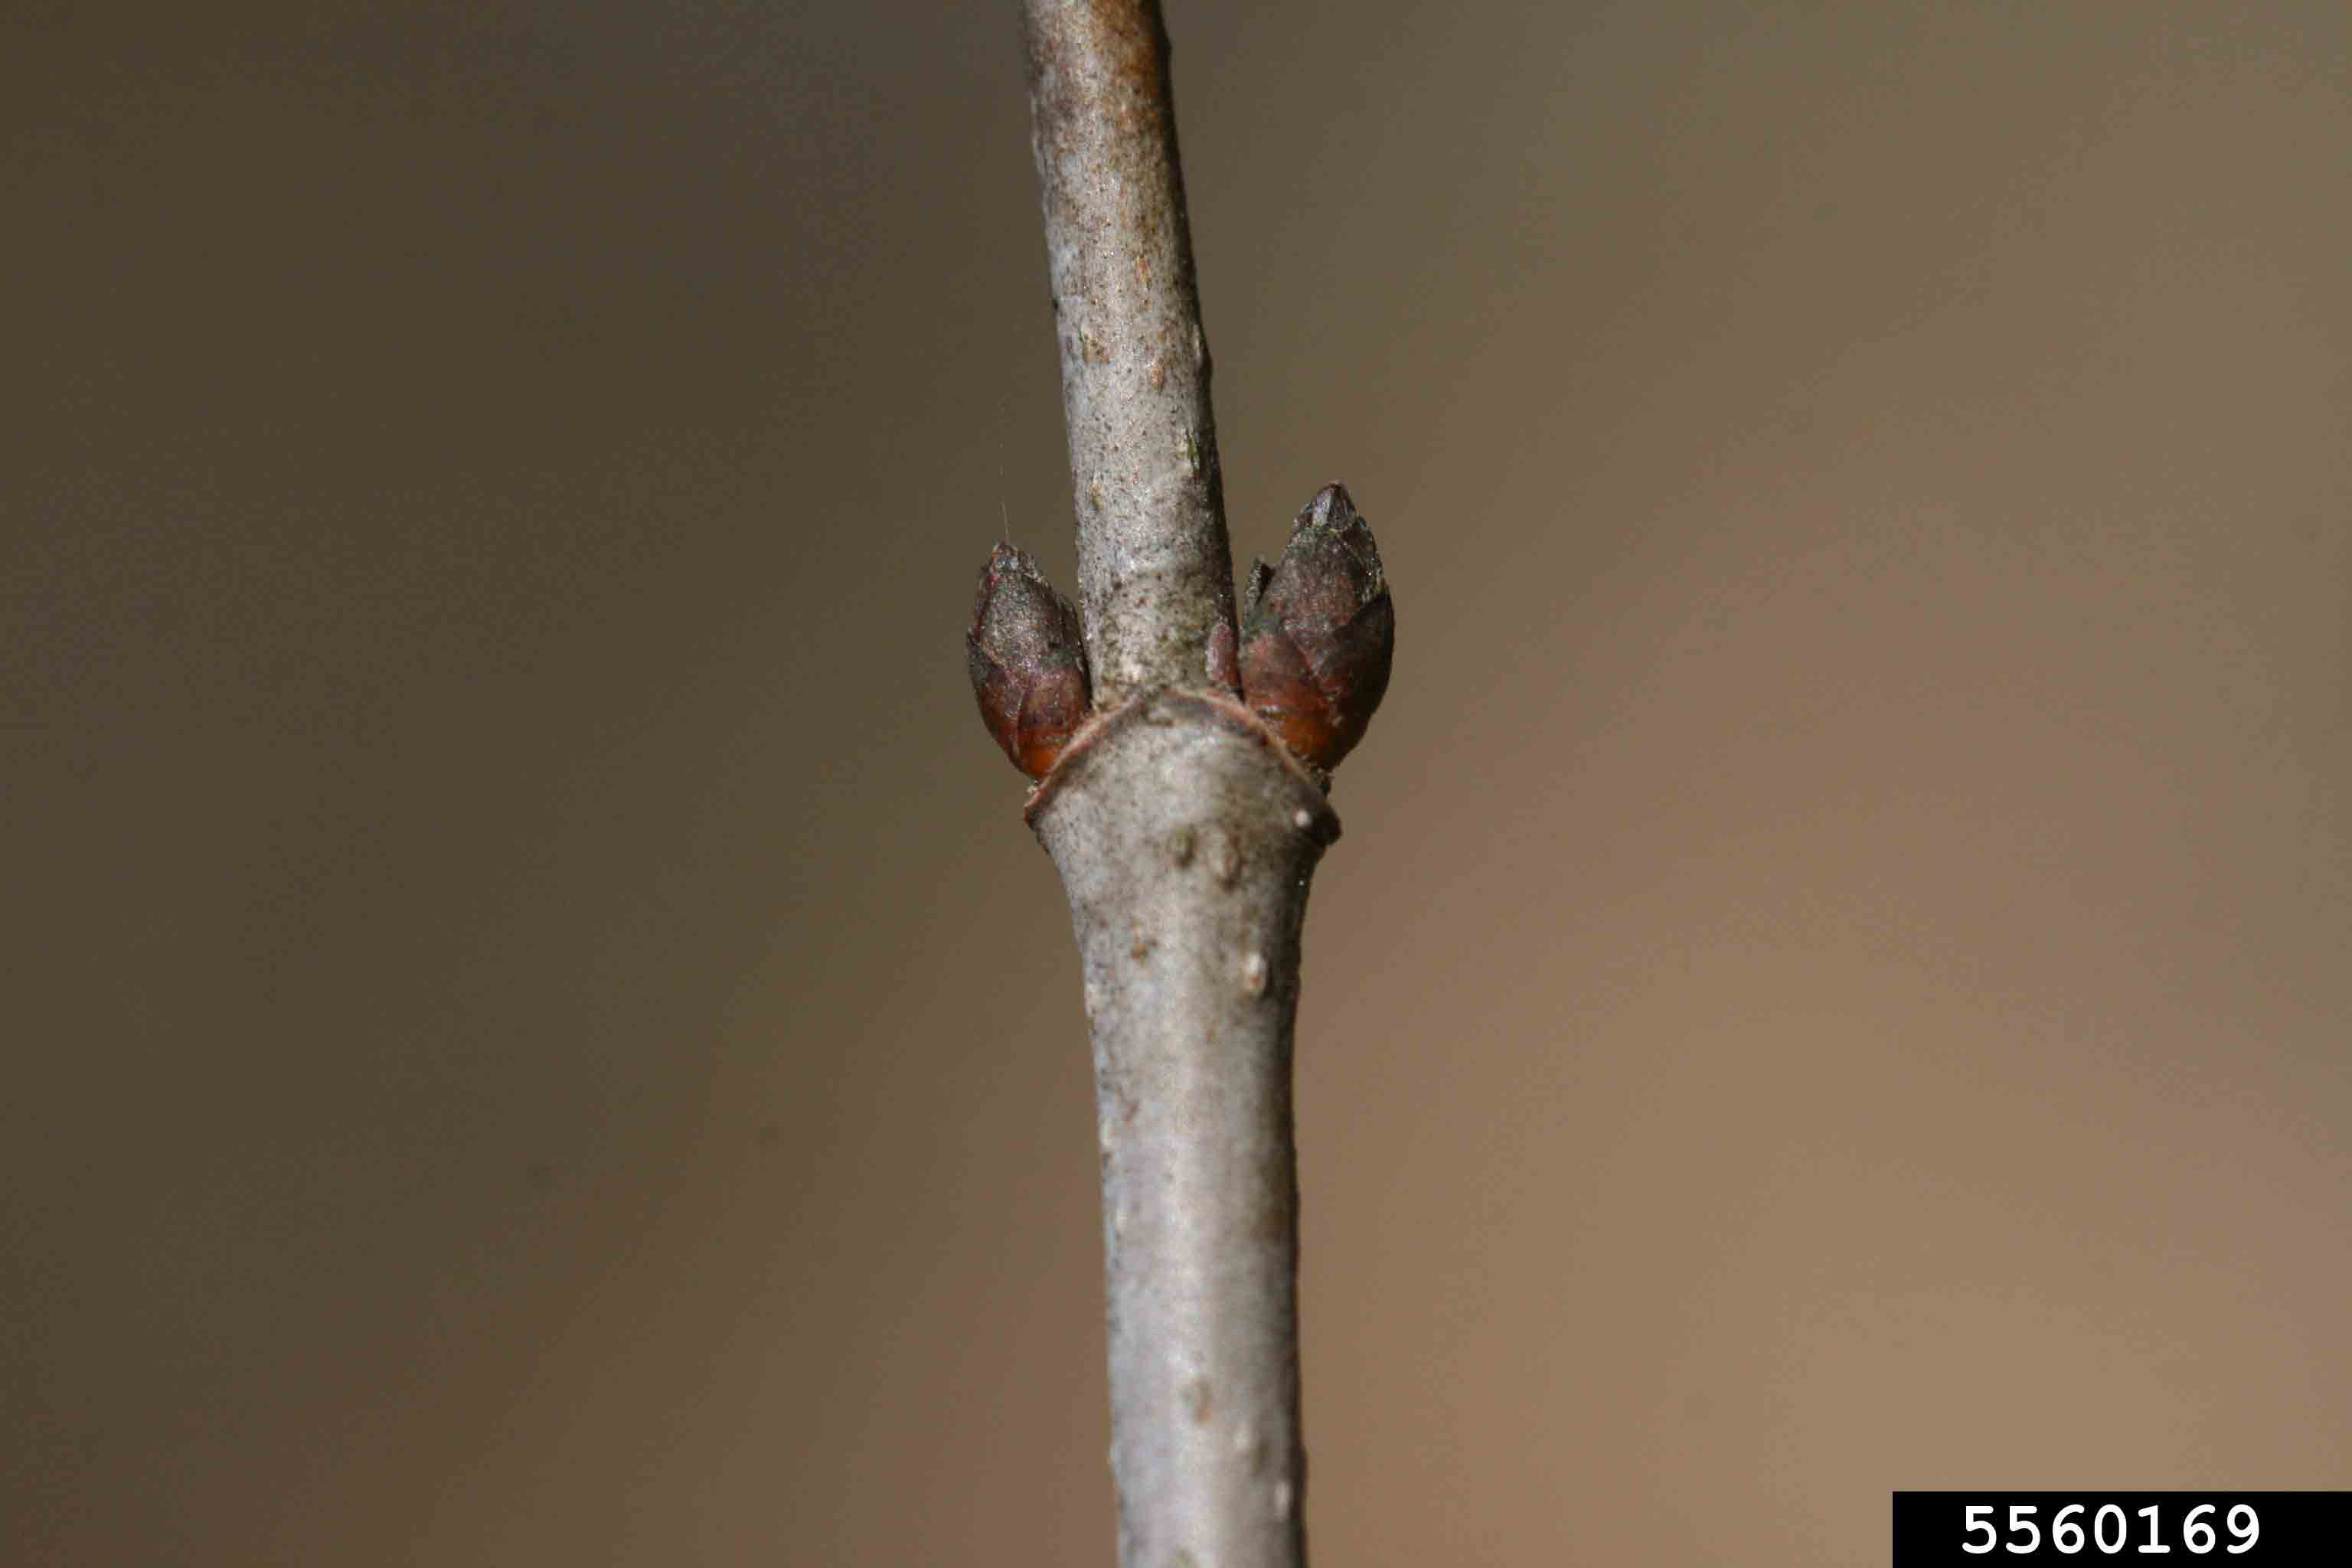 Sugar maple twig with buds, showing opposite arrangement